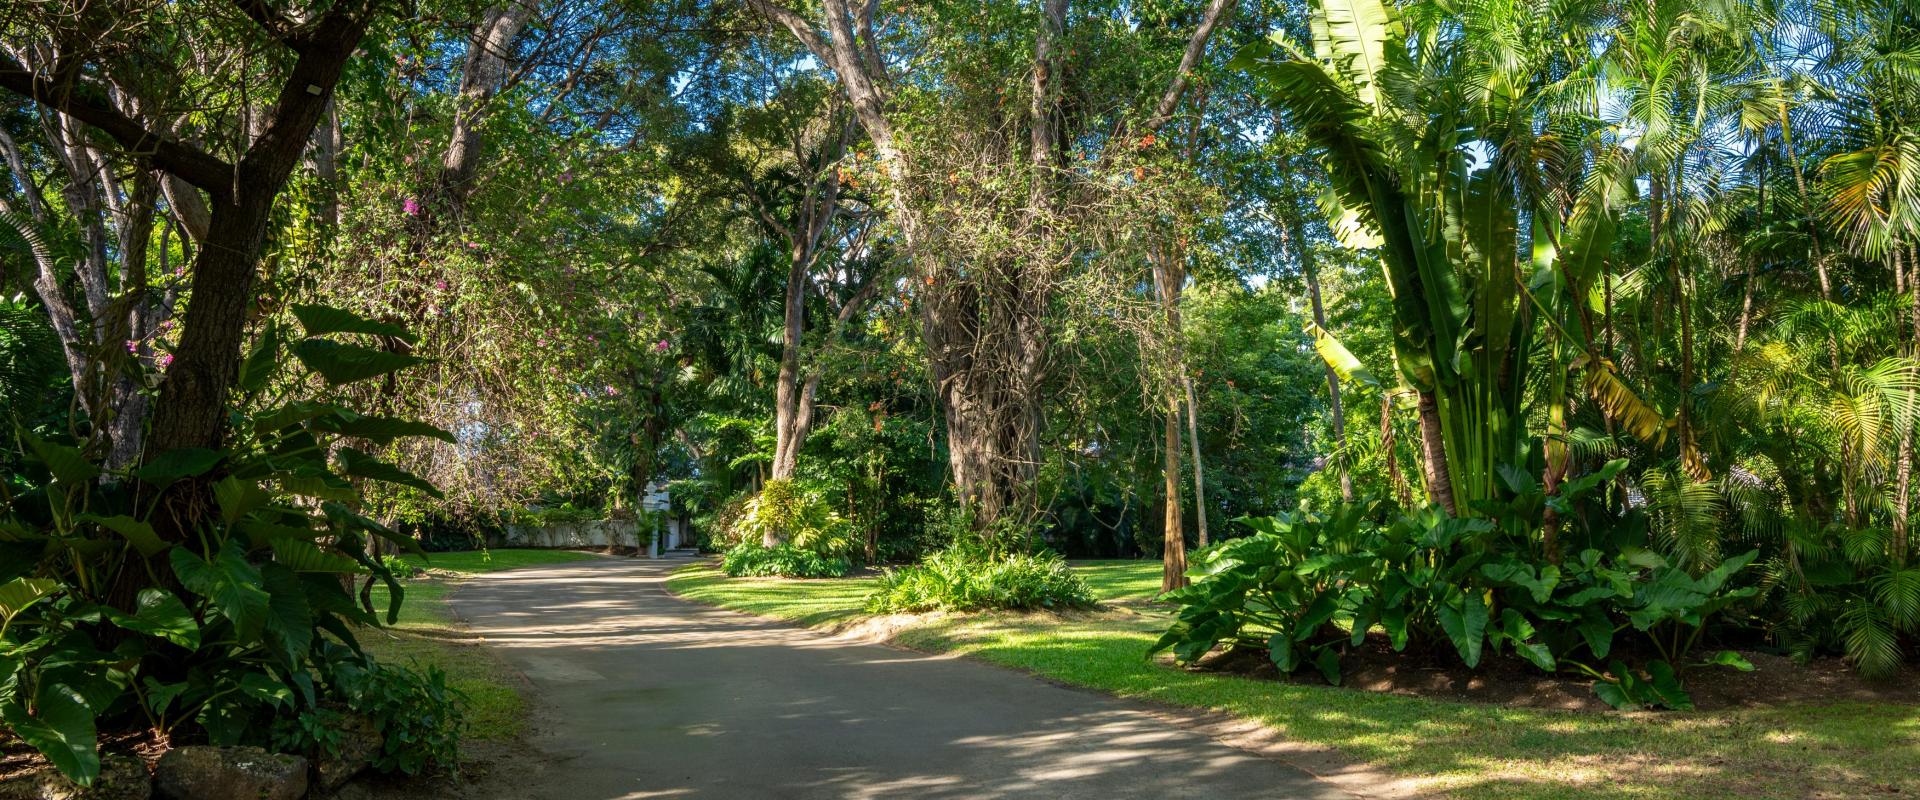 Heronetta Sandy Lane Estate Barbados Driveway with Trees and Gardens